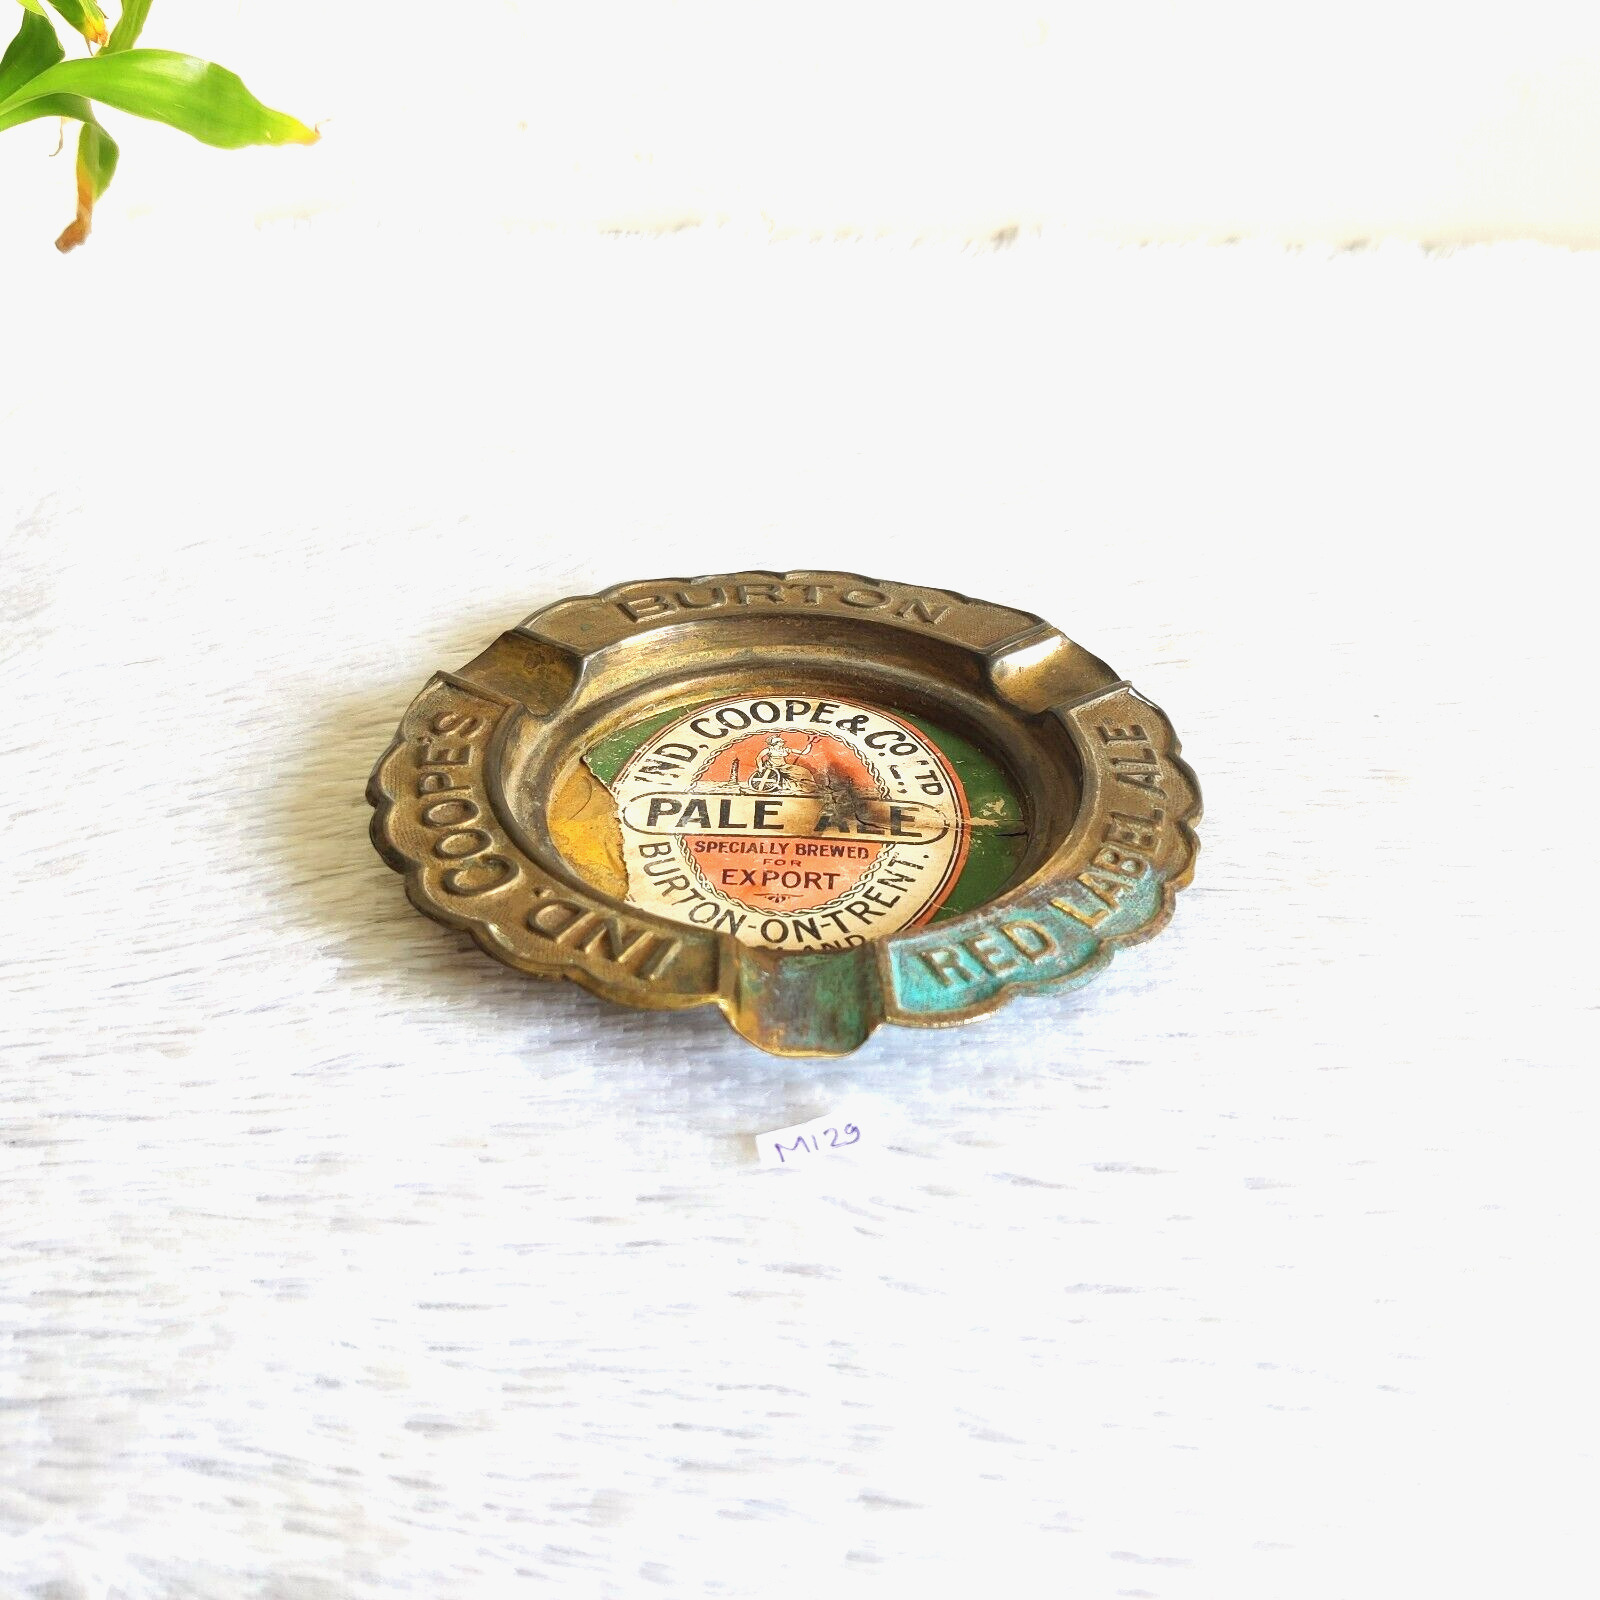 Vintage Red Label Ale Burton Ind Coope & Co Advertising Brass Ash Tray M129